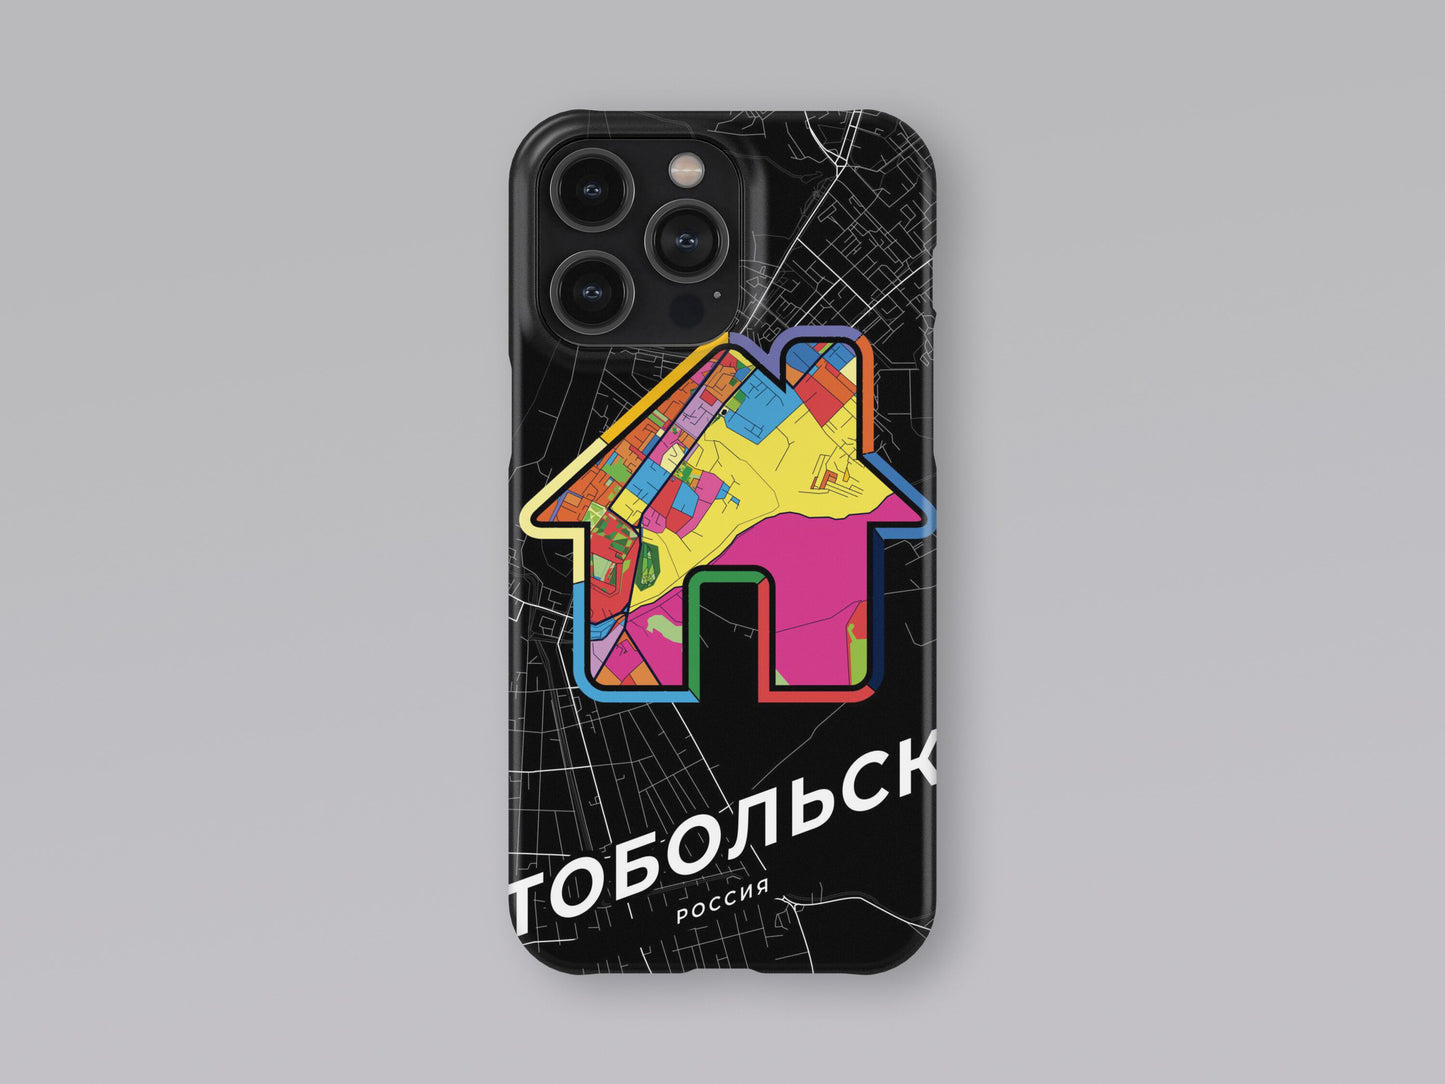 Tobolsk Russia slim phone case with colorful icon 3